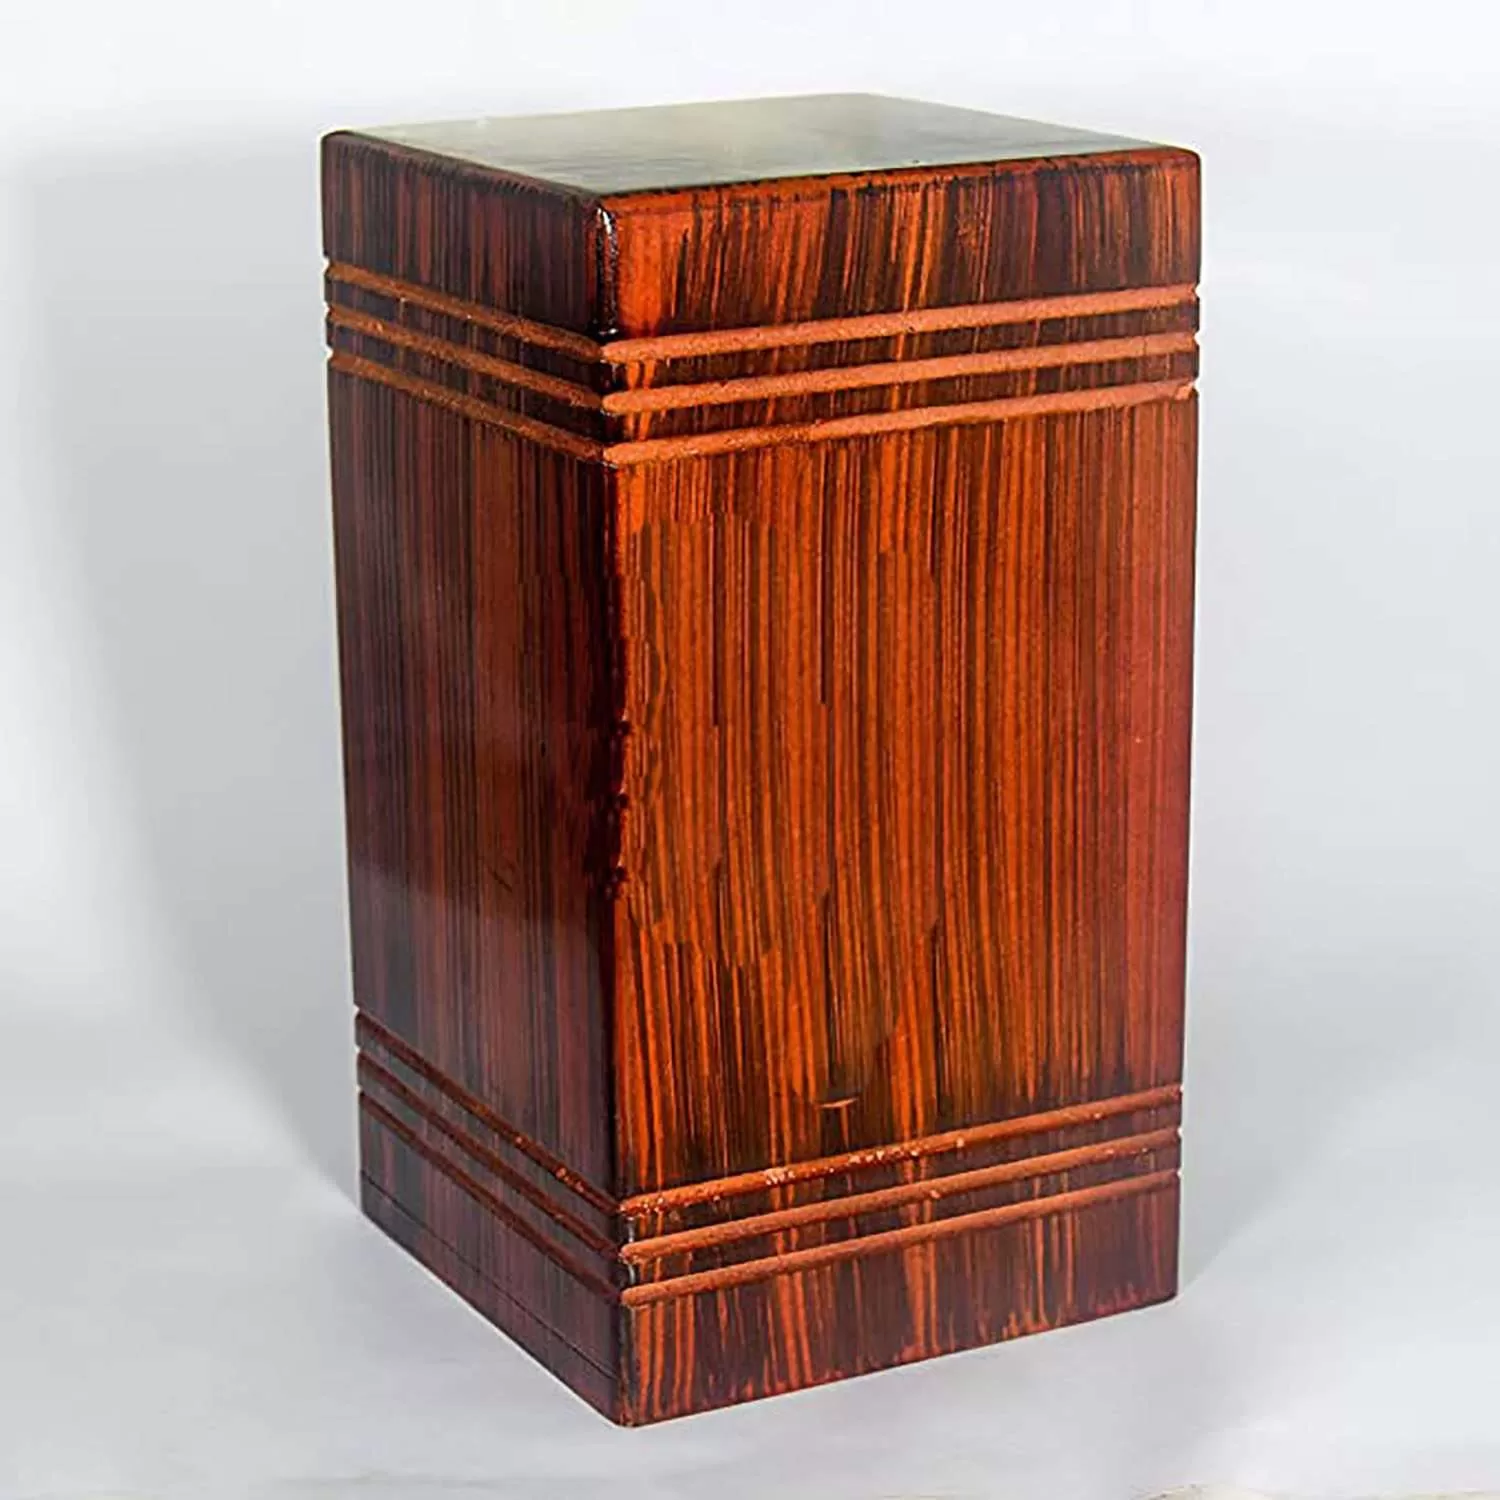 Handcrafted Cremation Urn Box for Human Ashes | Large Wooden Urn Box